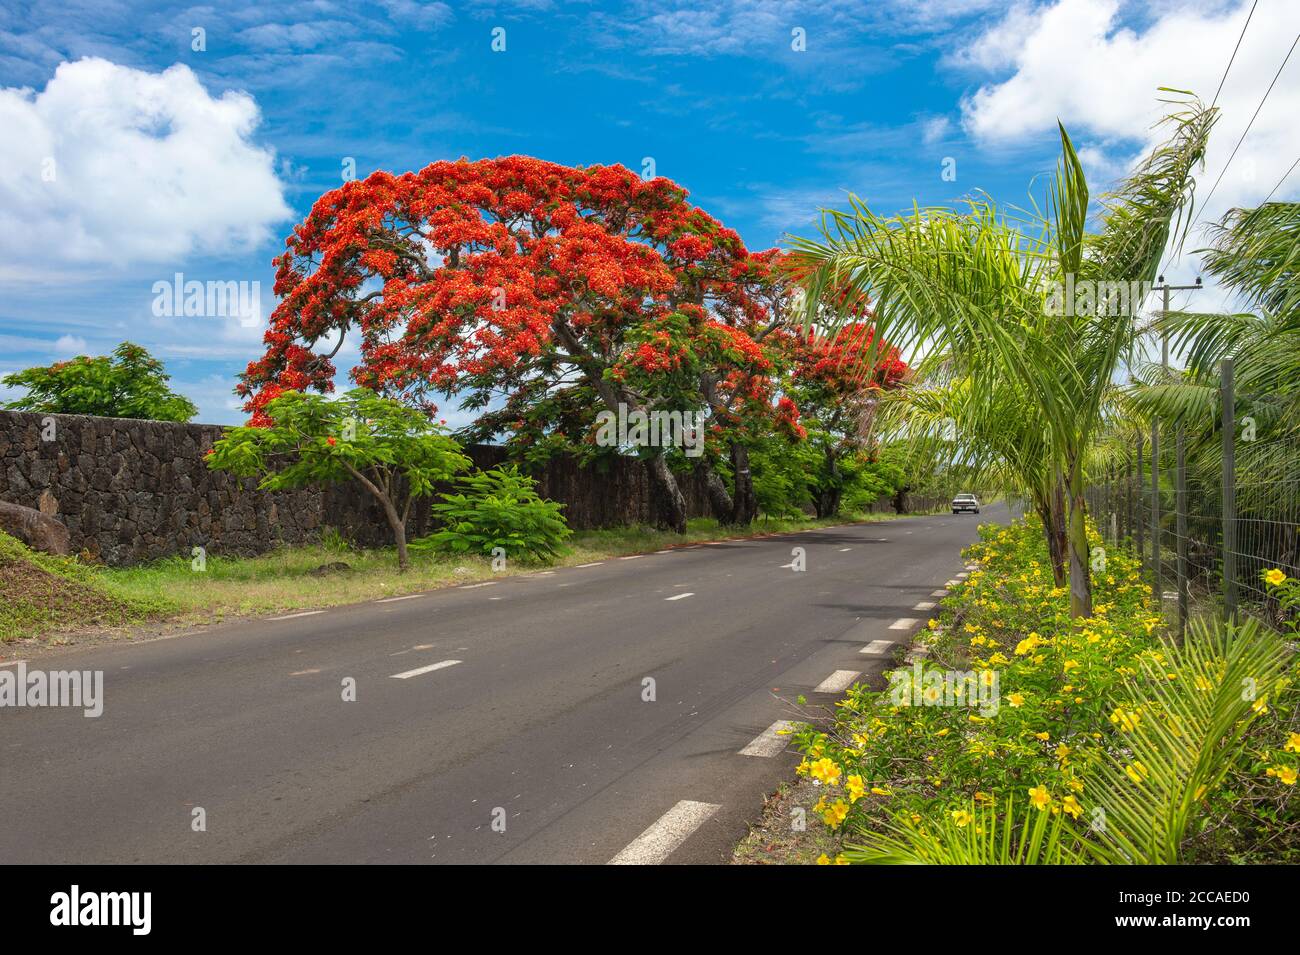 Tropical exotic plants and palm trees. Mauritius Island landscape Stock Photo